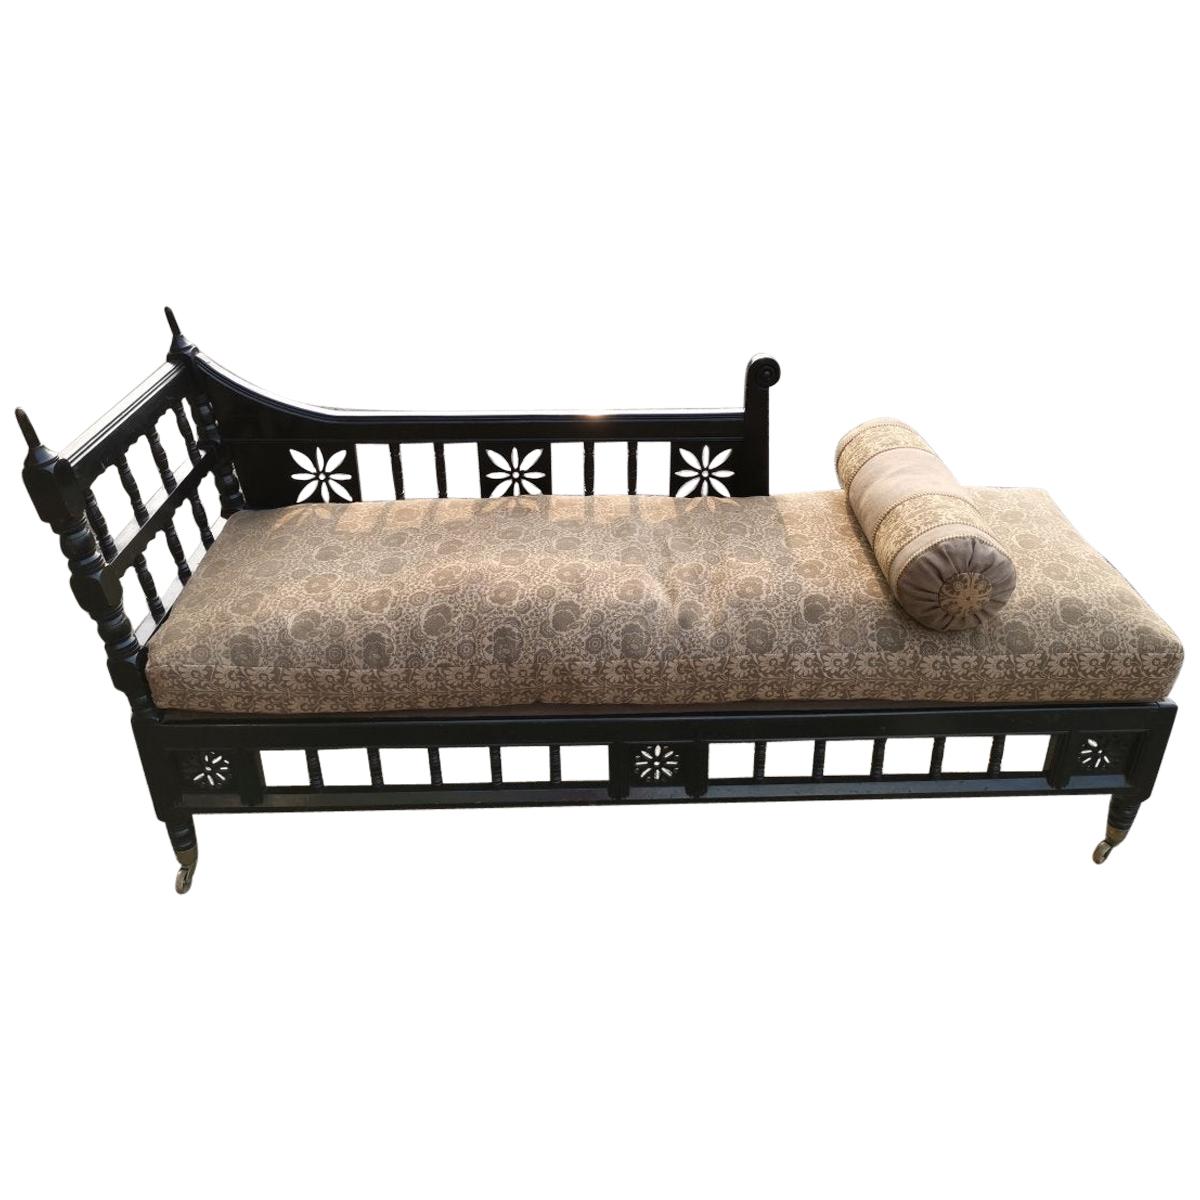 In the Style of E W Godwin, An Anglo-Japanese  Ebonized Chaise Lounge or Day Bed